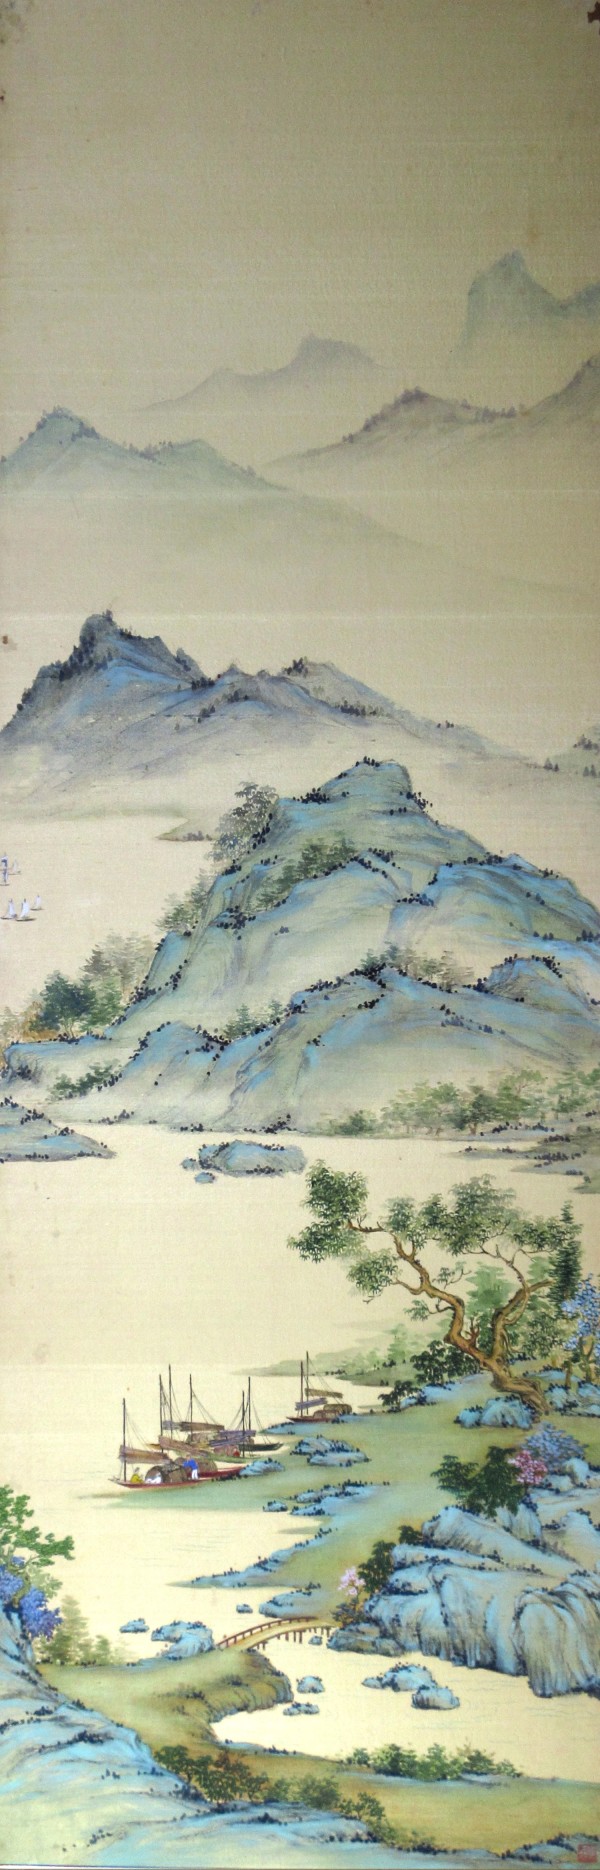 Landscape Panel 1 of 4 by Yee Wah Jung Attributed